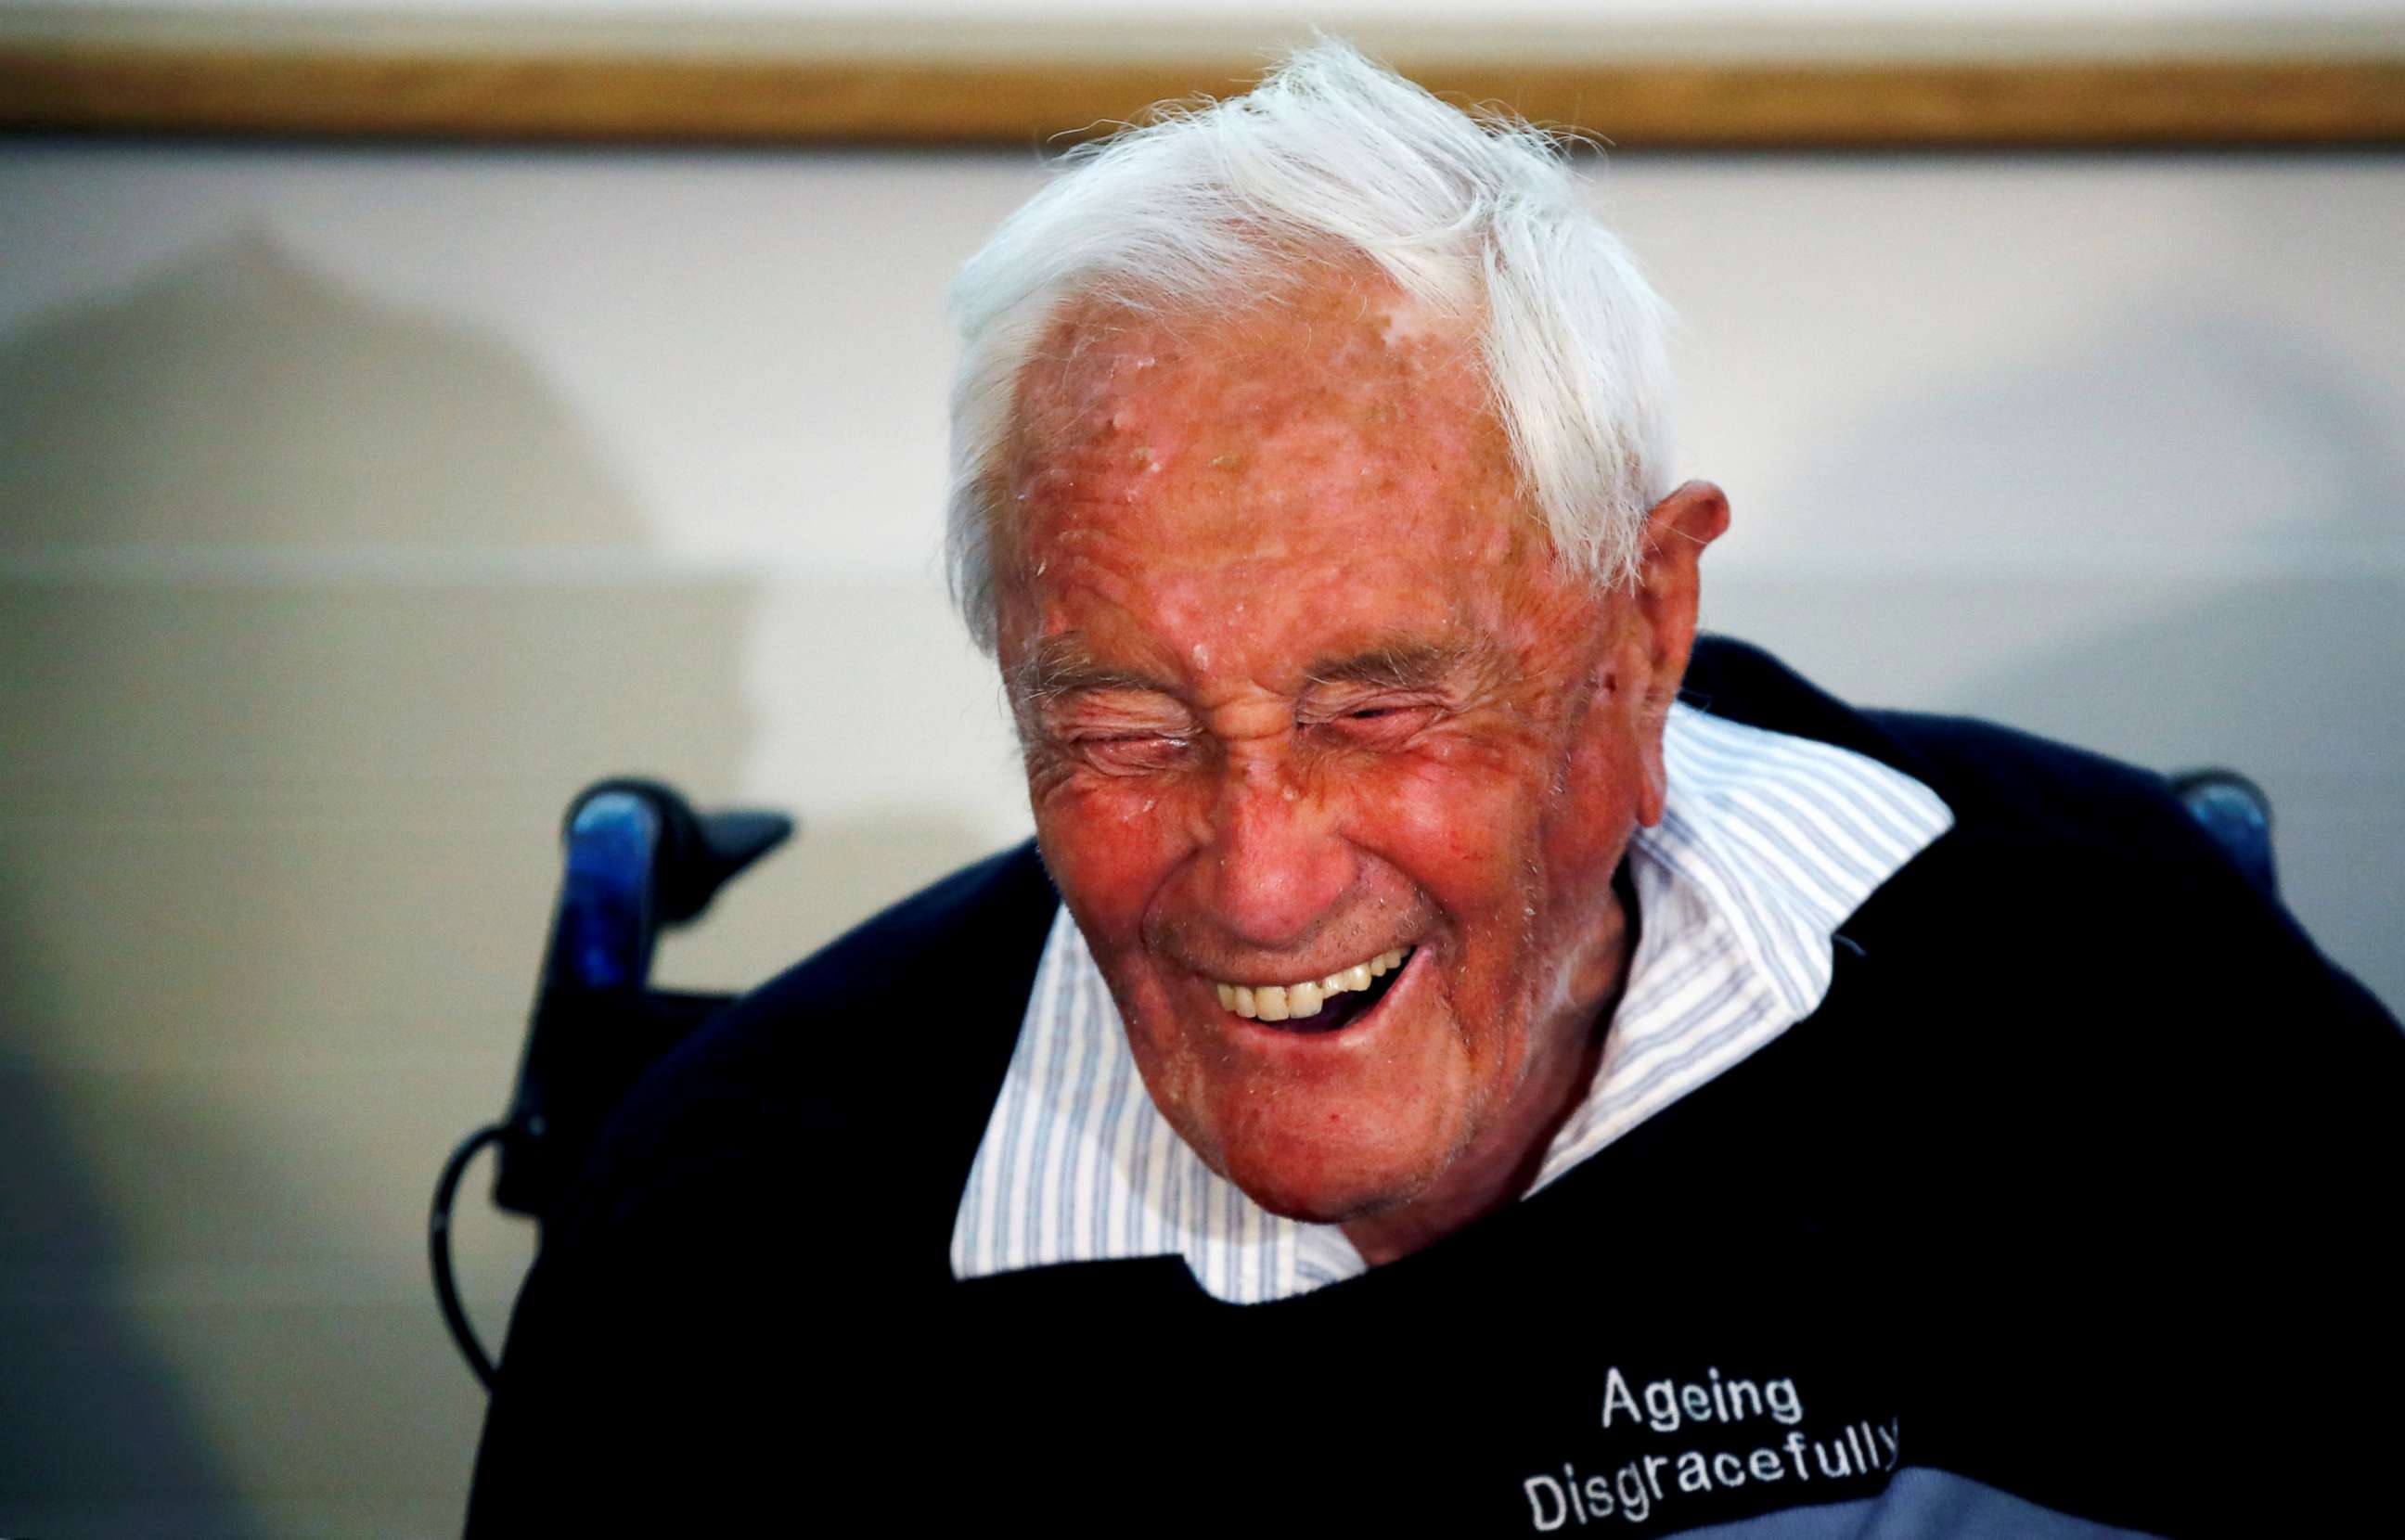 PHOTO: David Goodall, 104, reacts during a news conference a day before he took his own life in an assisted suicide, in Basel, Switzerland on May 9, 2018. 